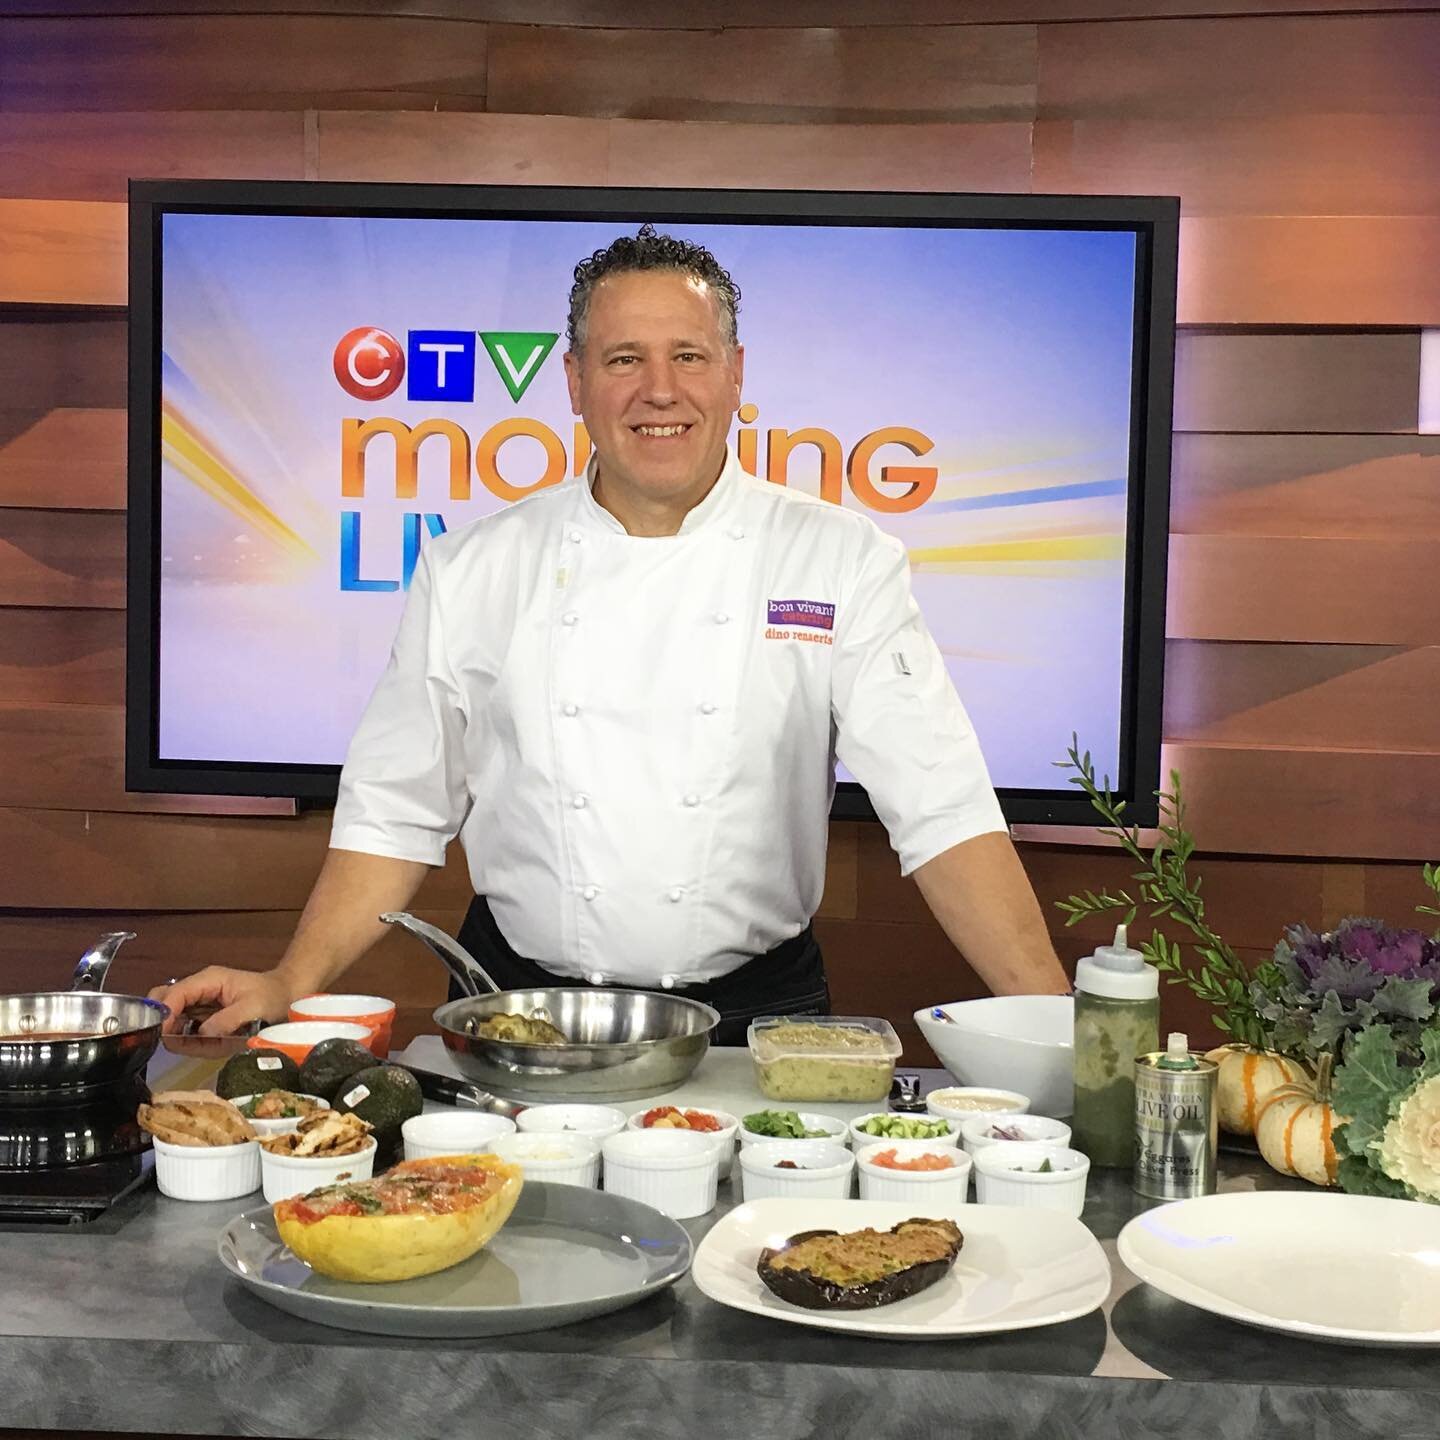 Tune in tomorrow morning around 8:30am to watch Chef Dino talk about ideas for your next BBQ menu! 
#lovecatering 
@ctvmorninglive